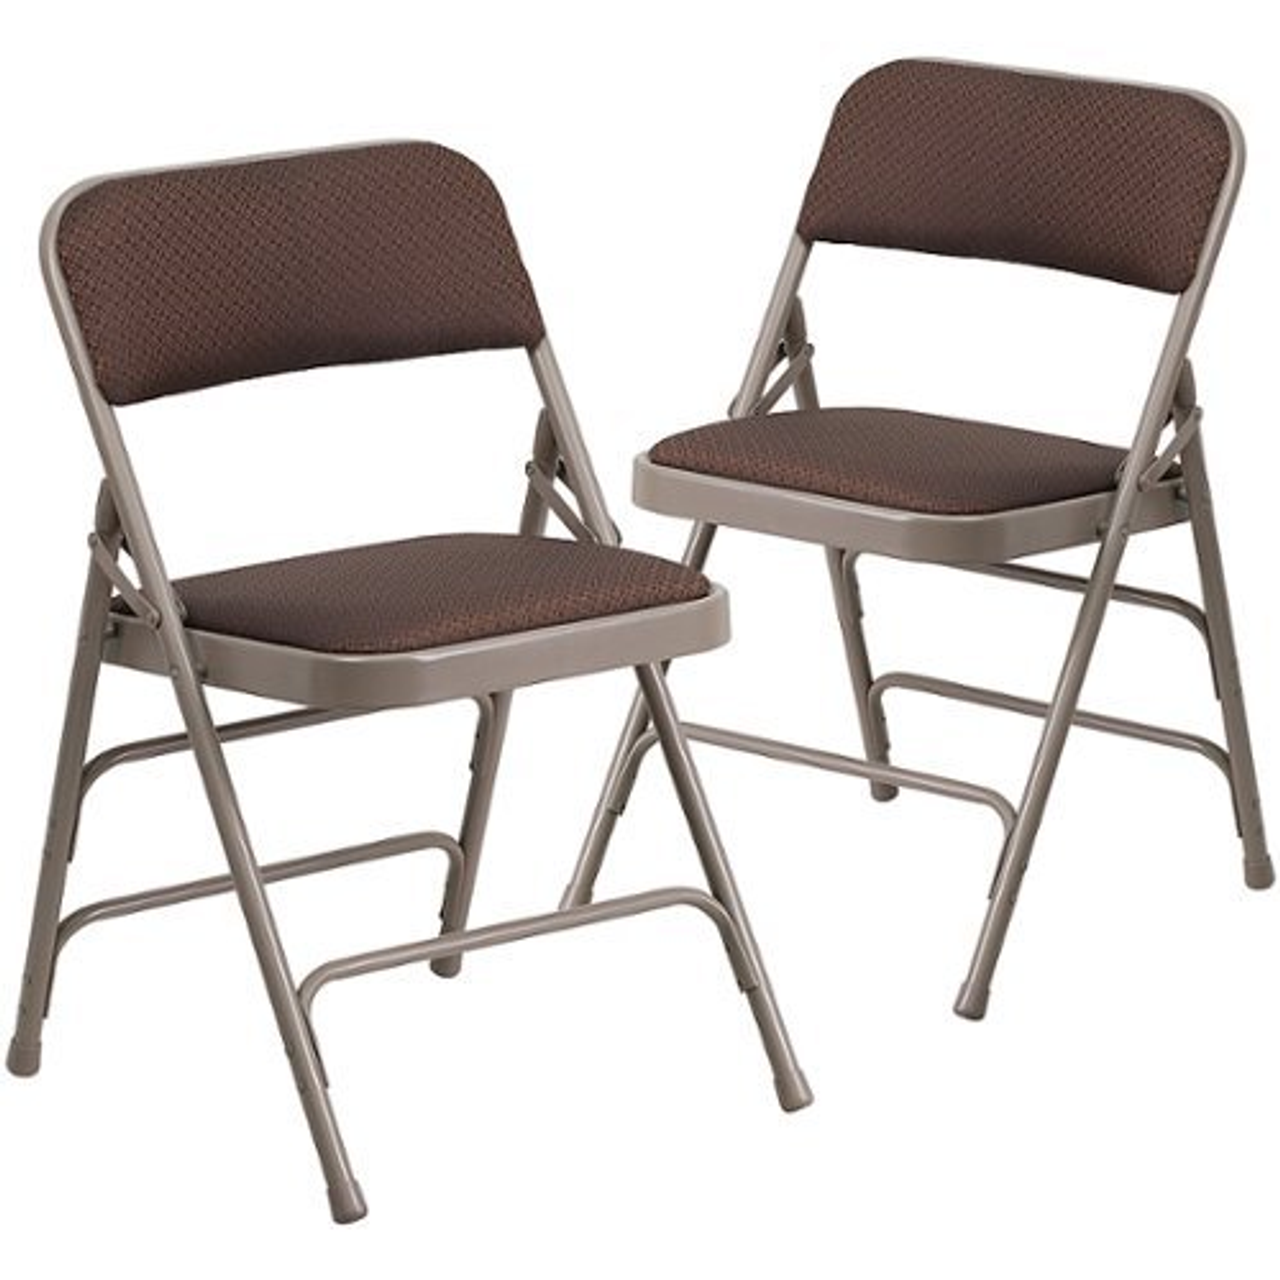 Flash Furniture - 2 Pack HERCULES Series Curved Triple Braced & Double Hinged Fabric Upholstered Metal Folding Chair - Brown Patterned